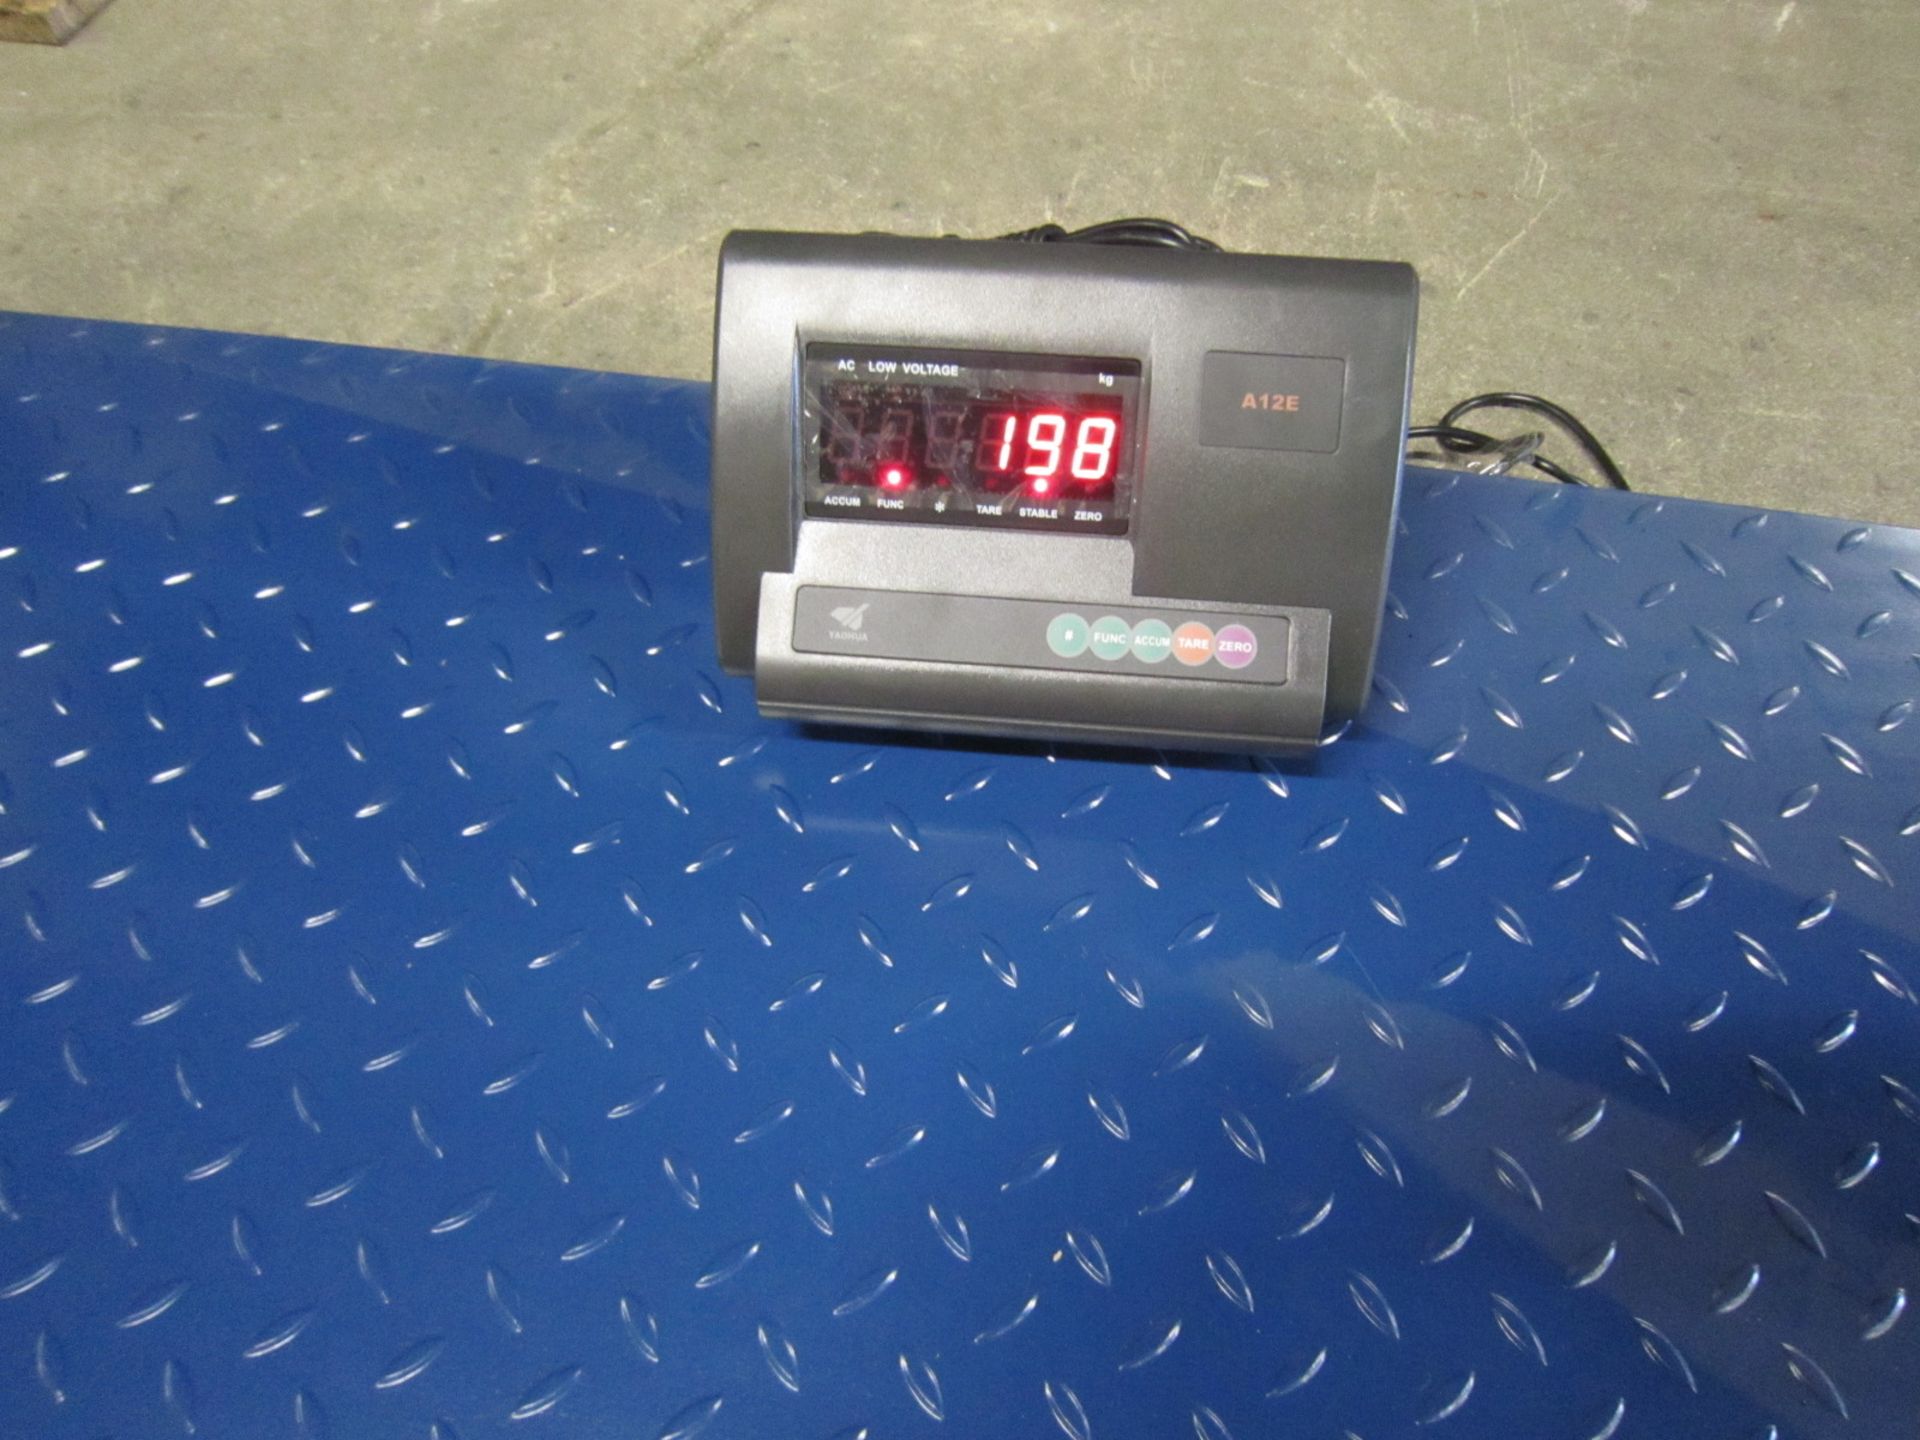 MINT 6500lb digital floor scale - 48" x 48" - Great DRO (digital readout) with 1lb accuracy - Image 2 of 2